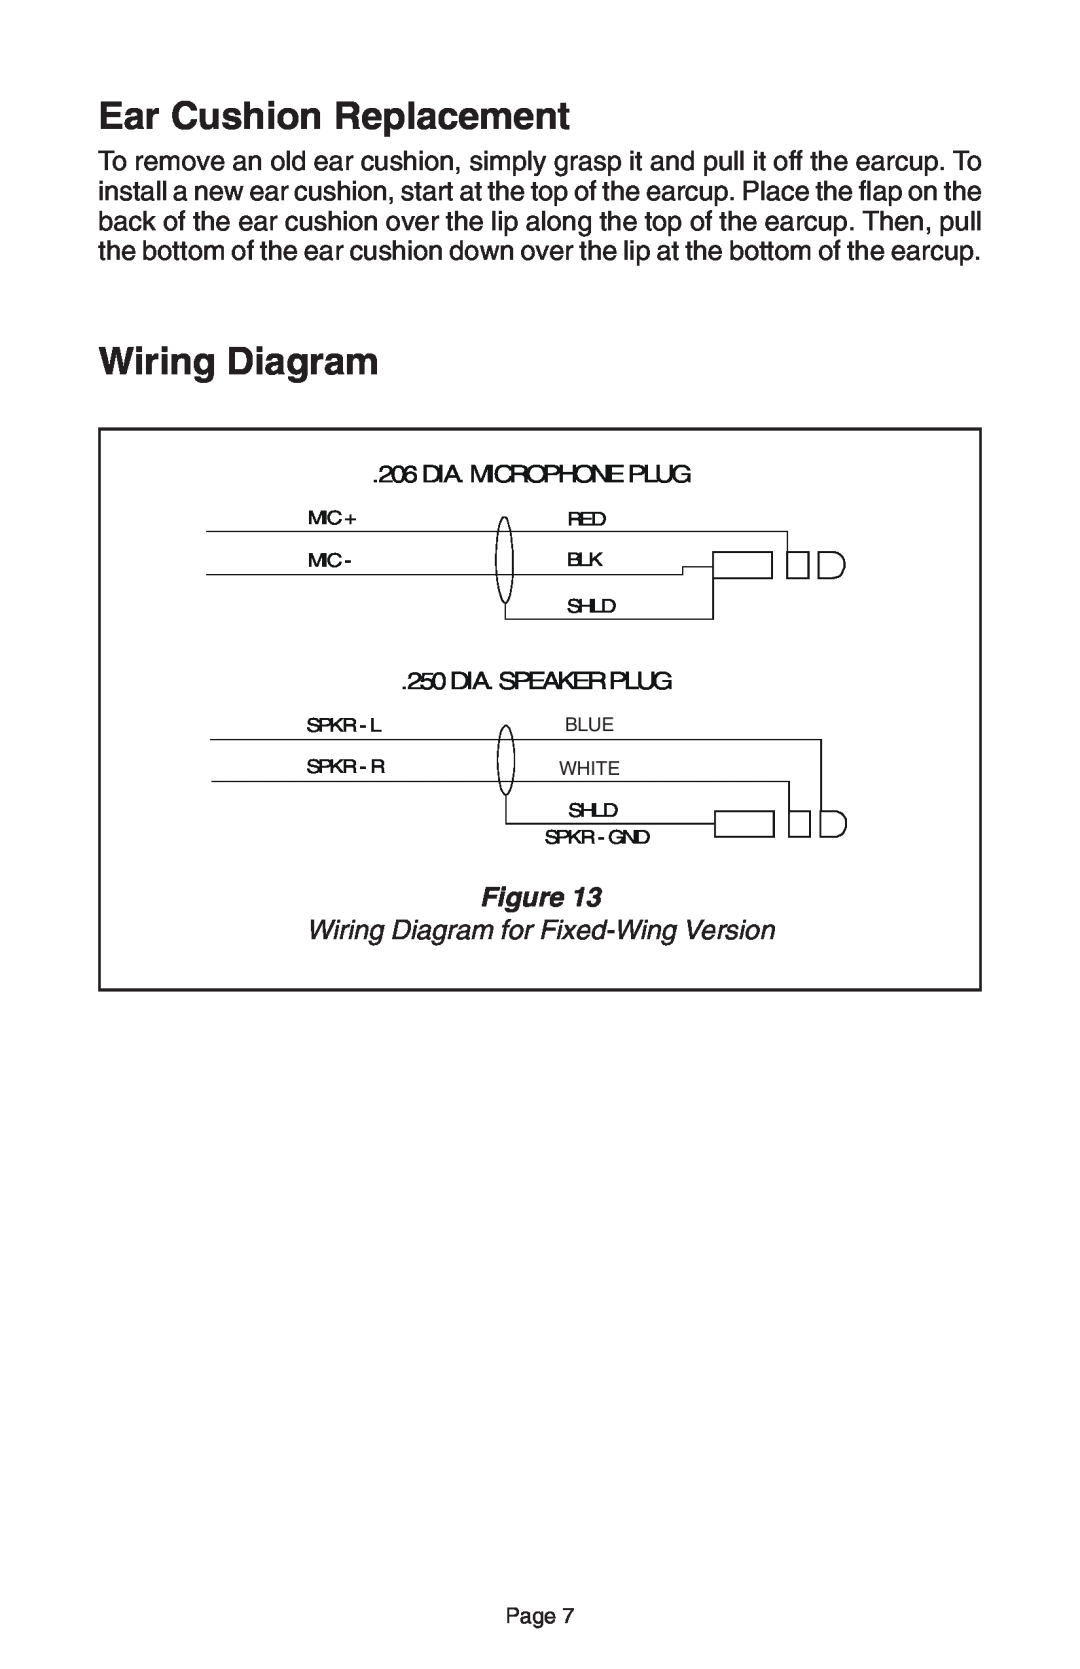 Telex 50-D manual Ear Cushion Replacement, Wiring Diagram for Fixed-WingVersion, 206 DIA. MICROPHONE PLUG 